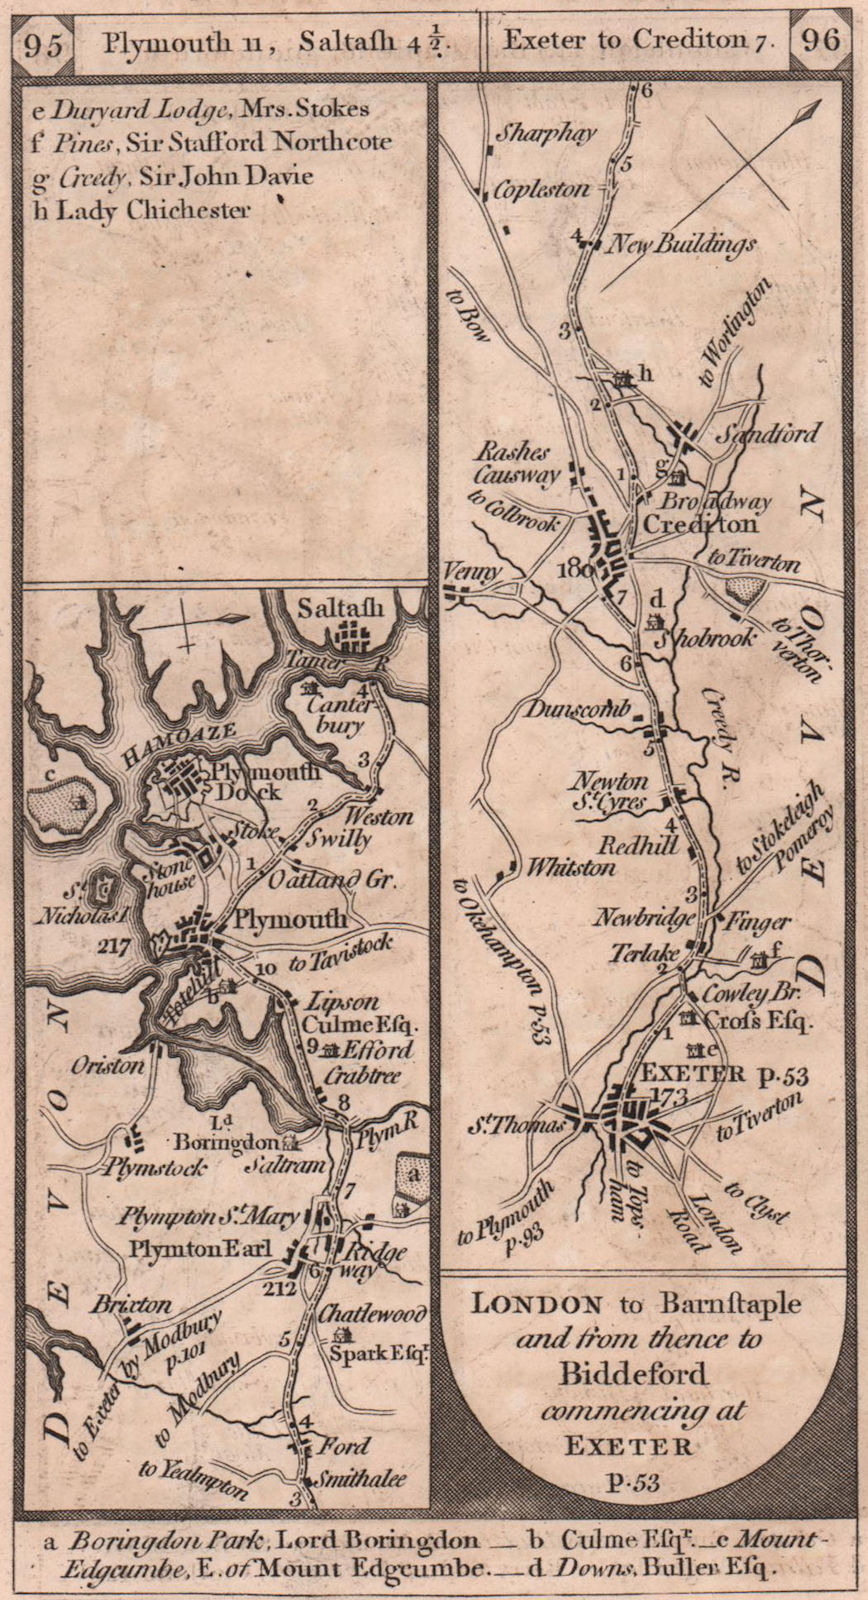 Associate Product Plympton-Plymouth-Saltash. Exeter-Crediton road strip map PATERSON 1803